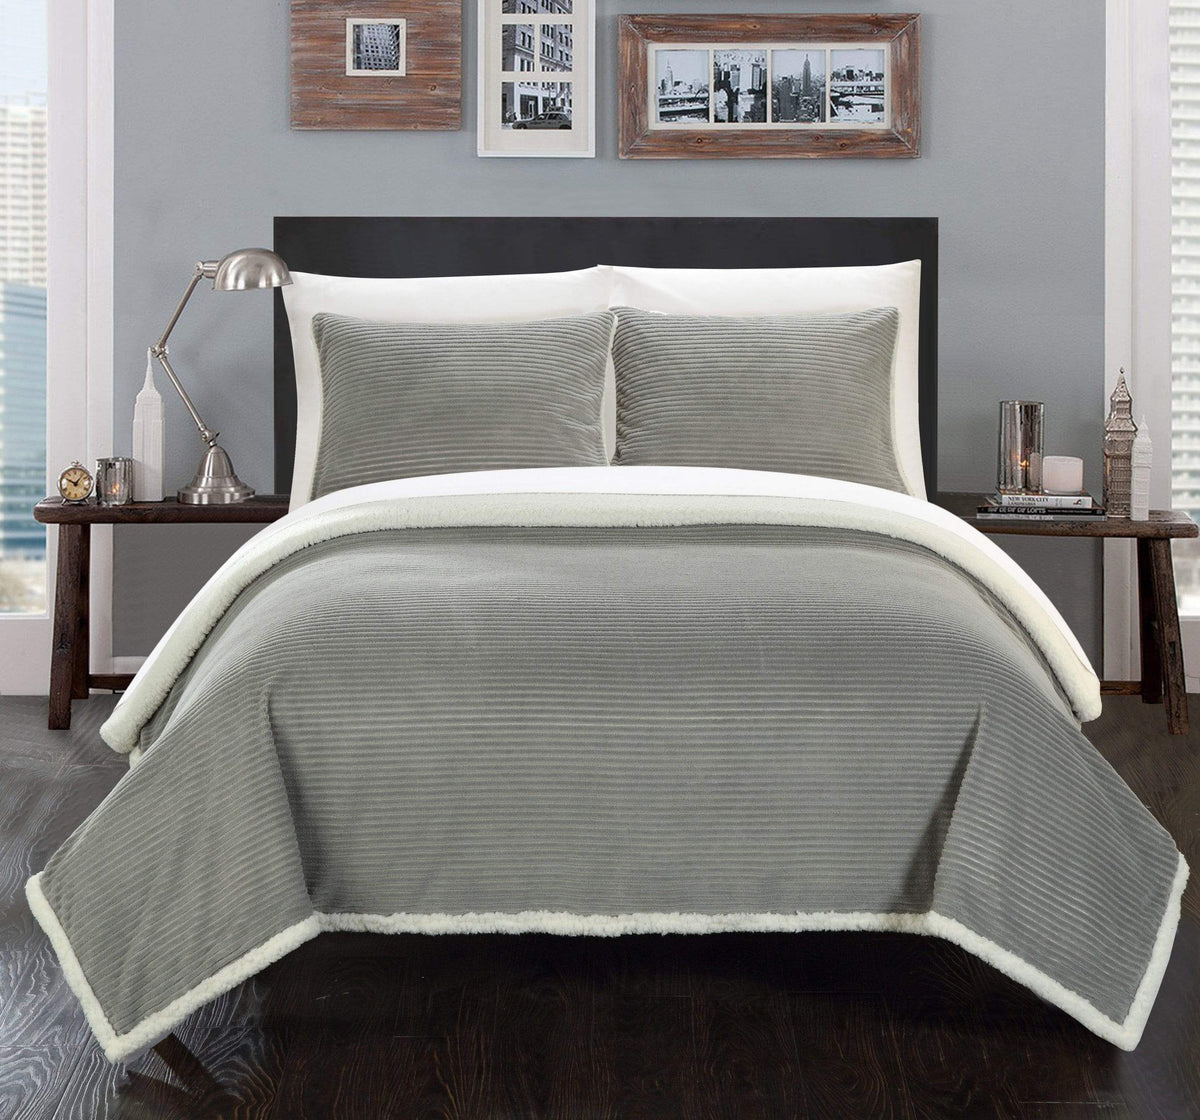 Chic Home Lancy Blanket 3 Piece Set Ultra Plush Micro Mink Sherpa Lined Textured Bedding Grey